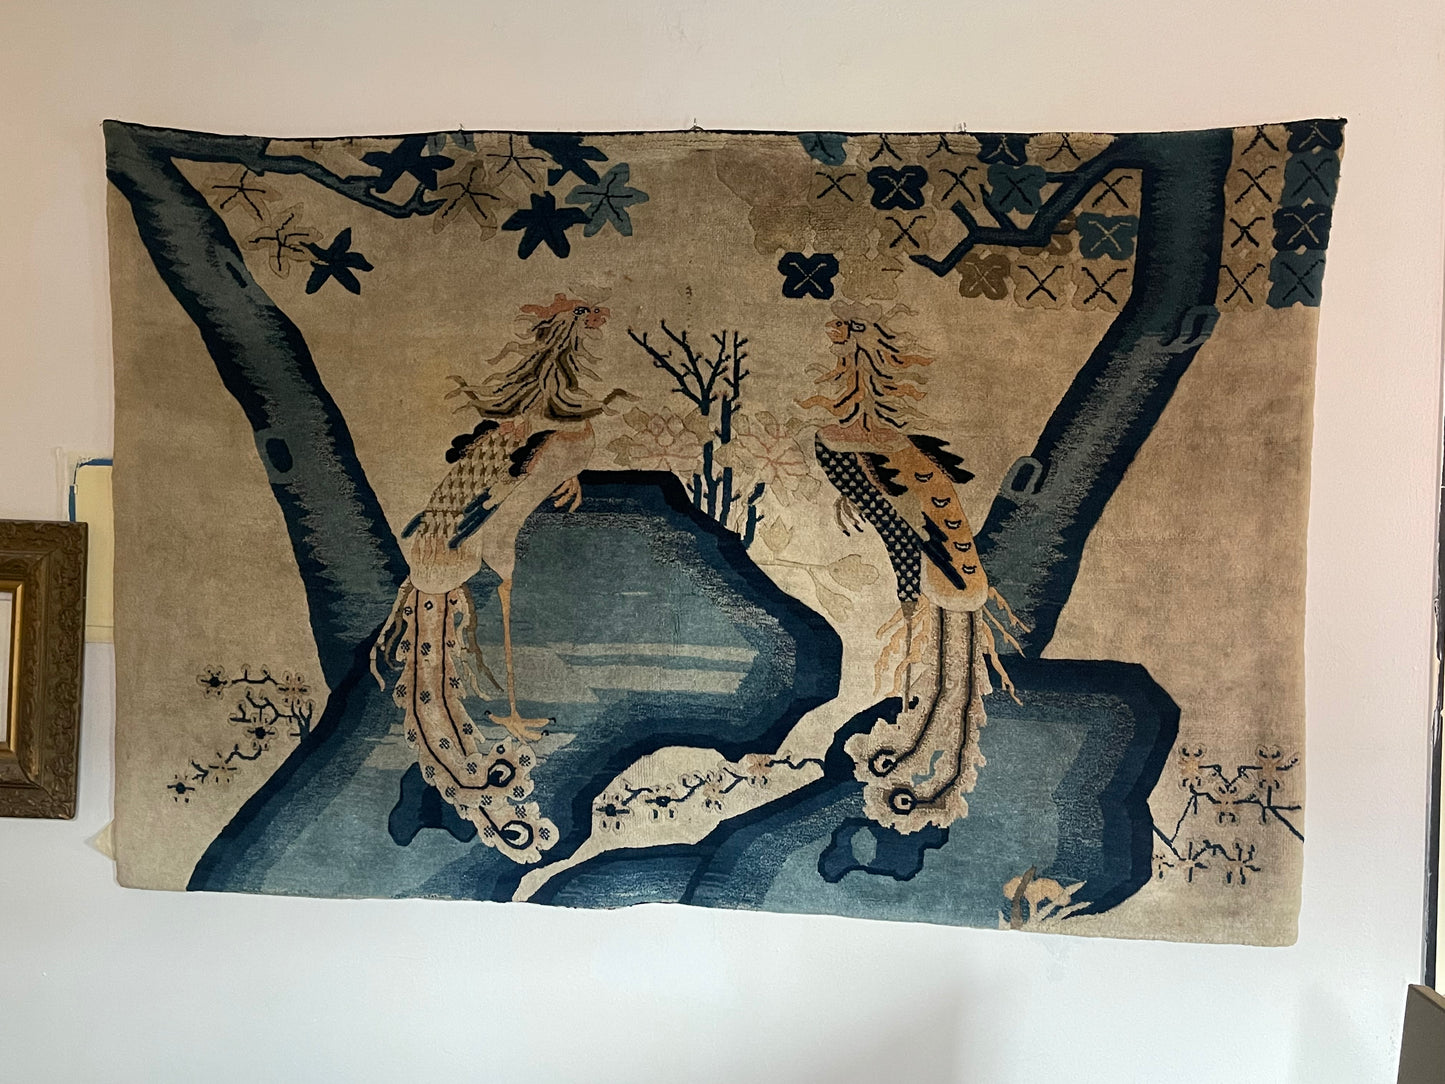 An antique Chinese pictorial rug